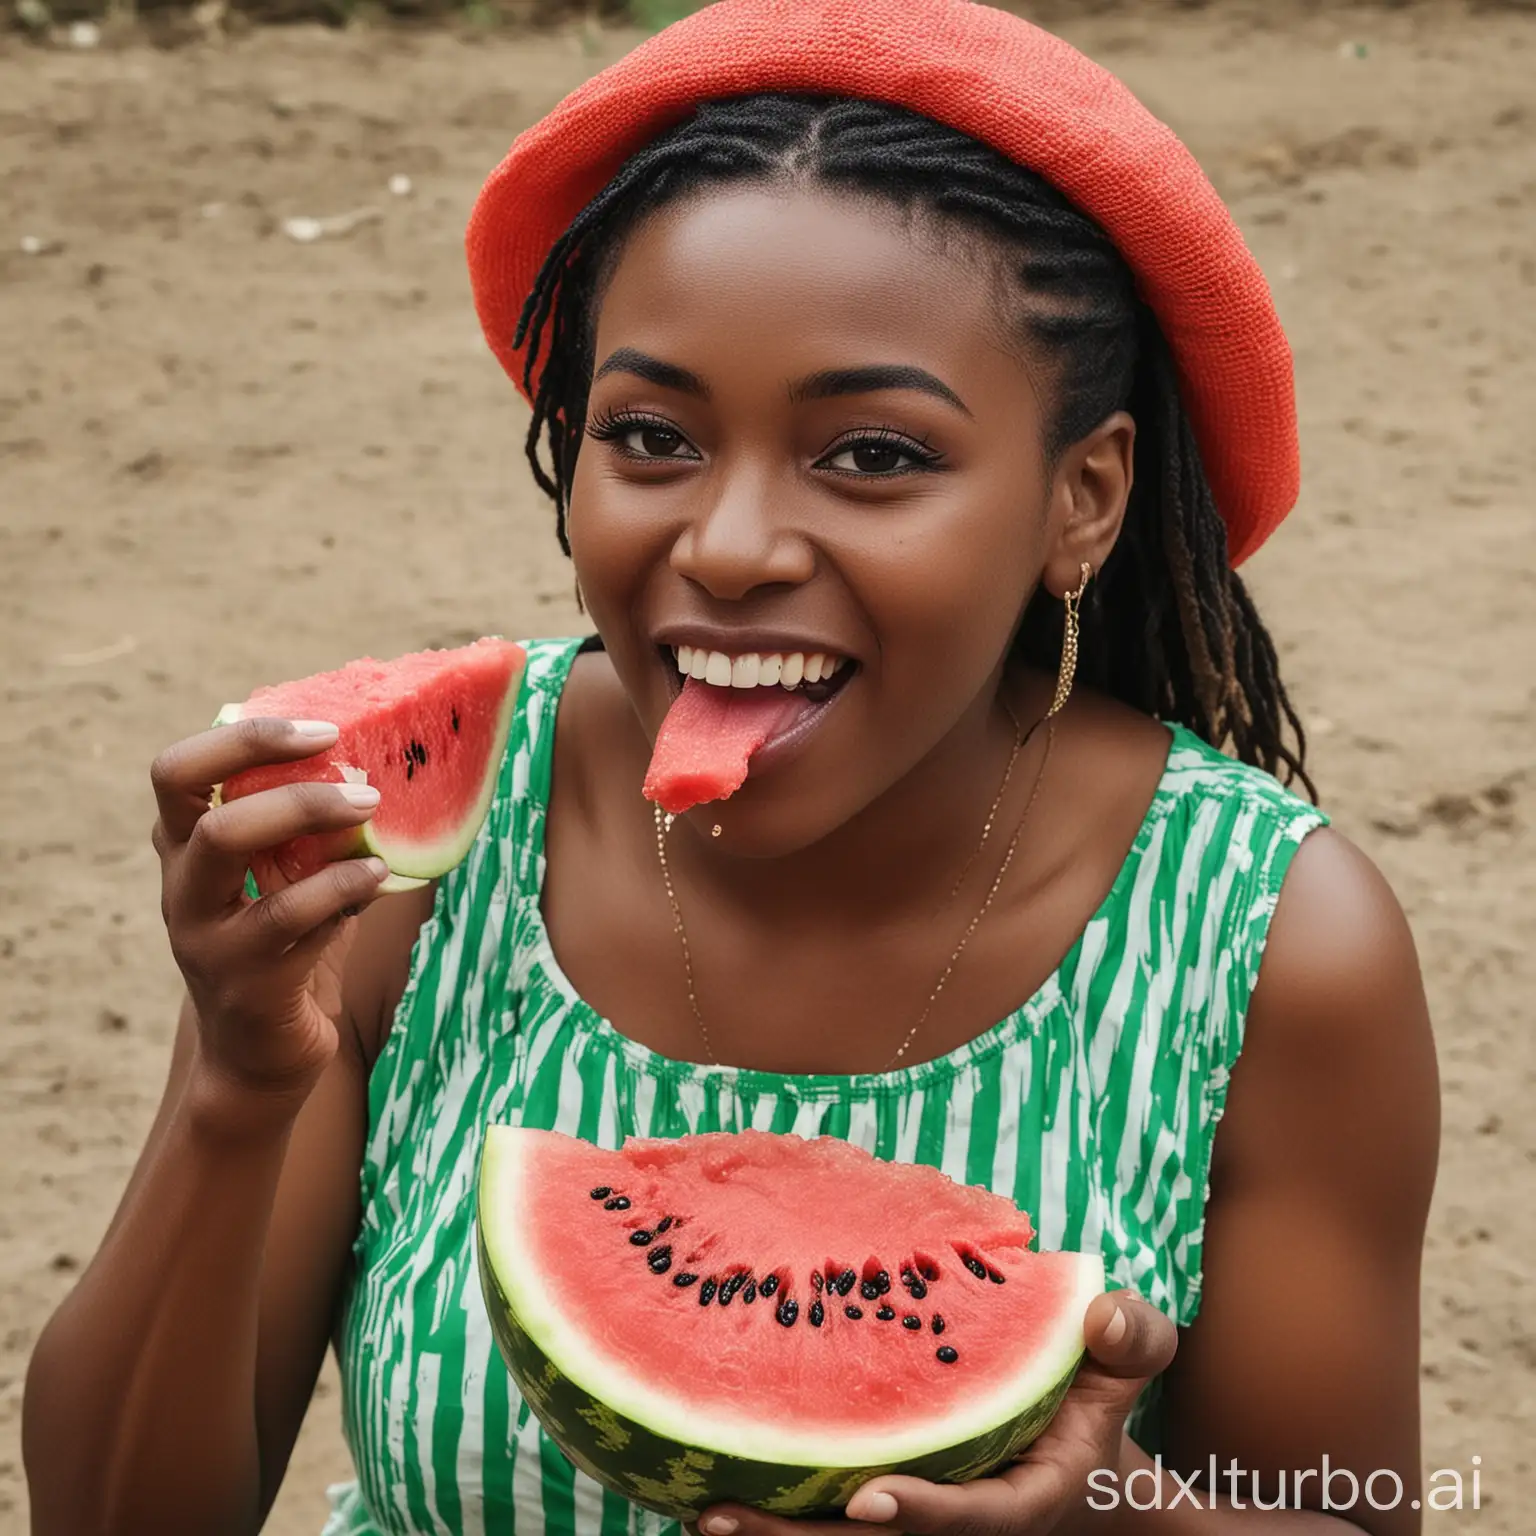 eating watermelon with hand by africa pop singer